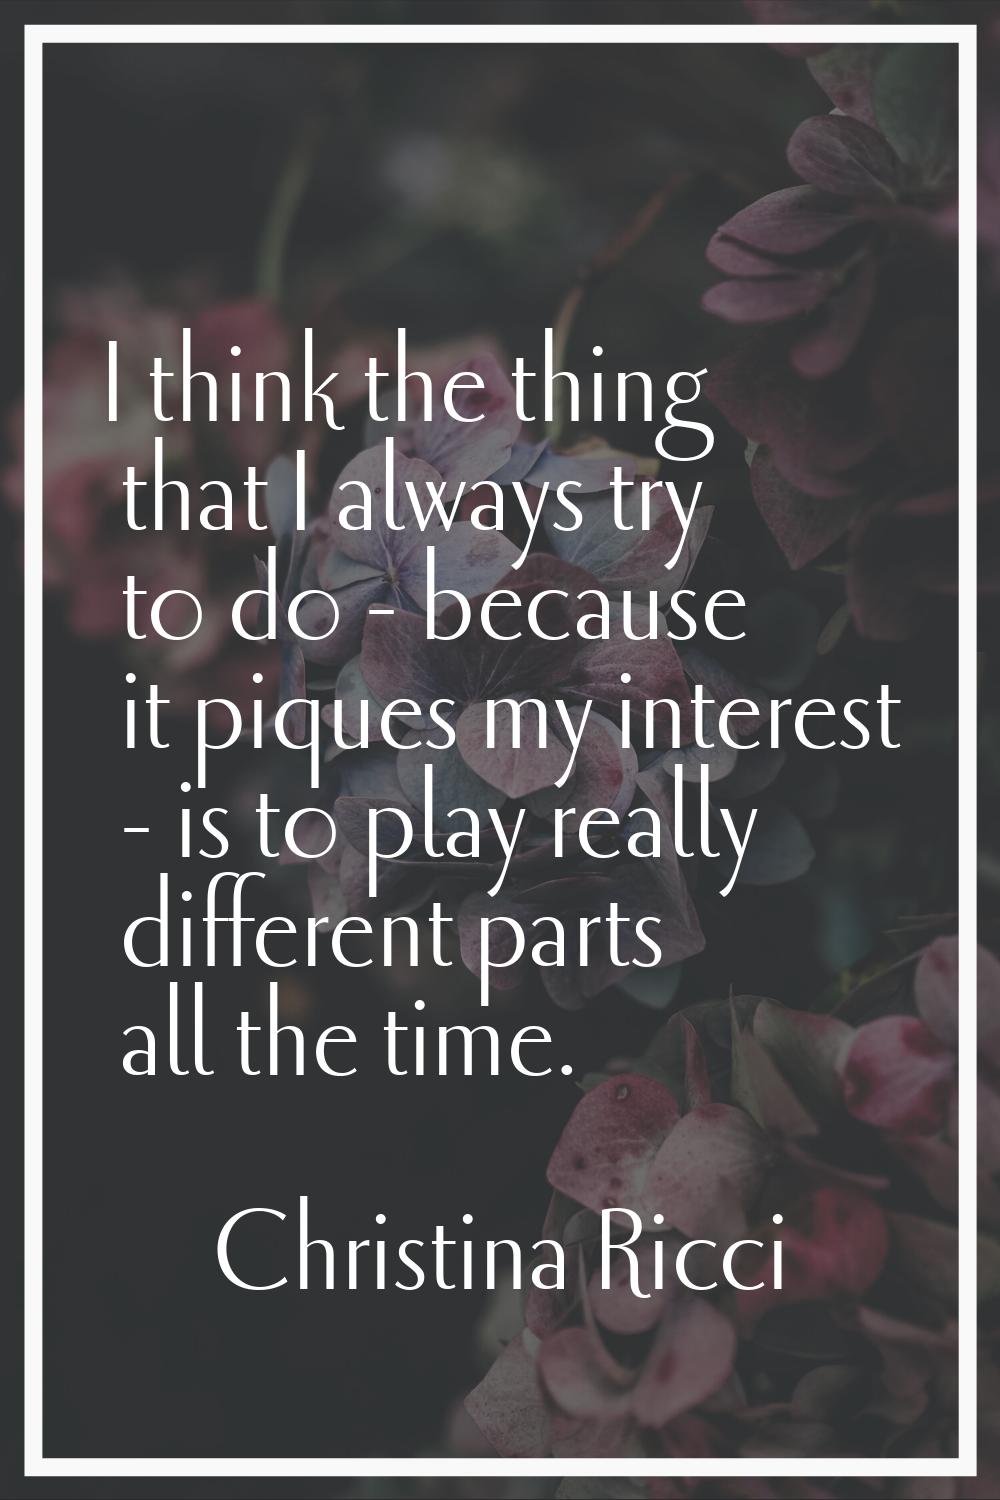 I think the thing that I always try to do - because it piques my interest - is to play really diffe